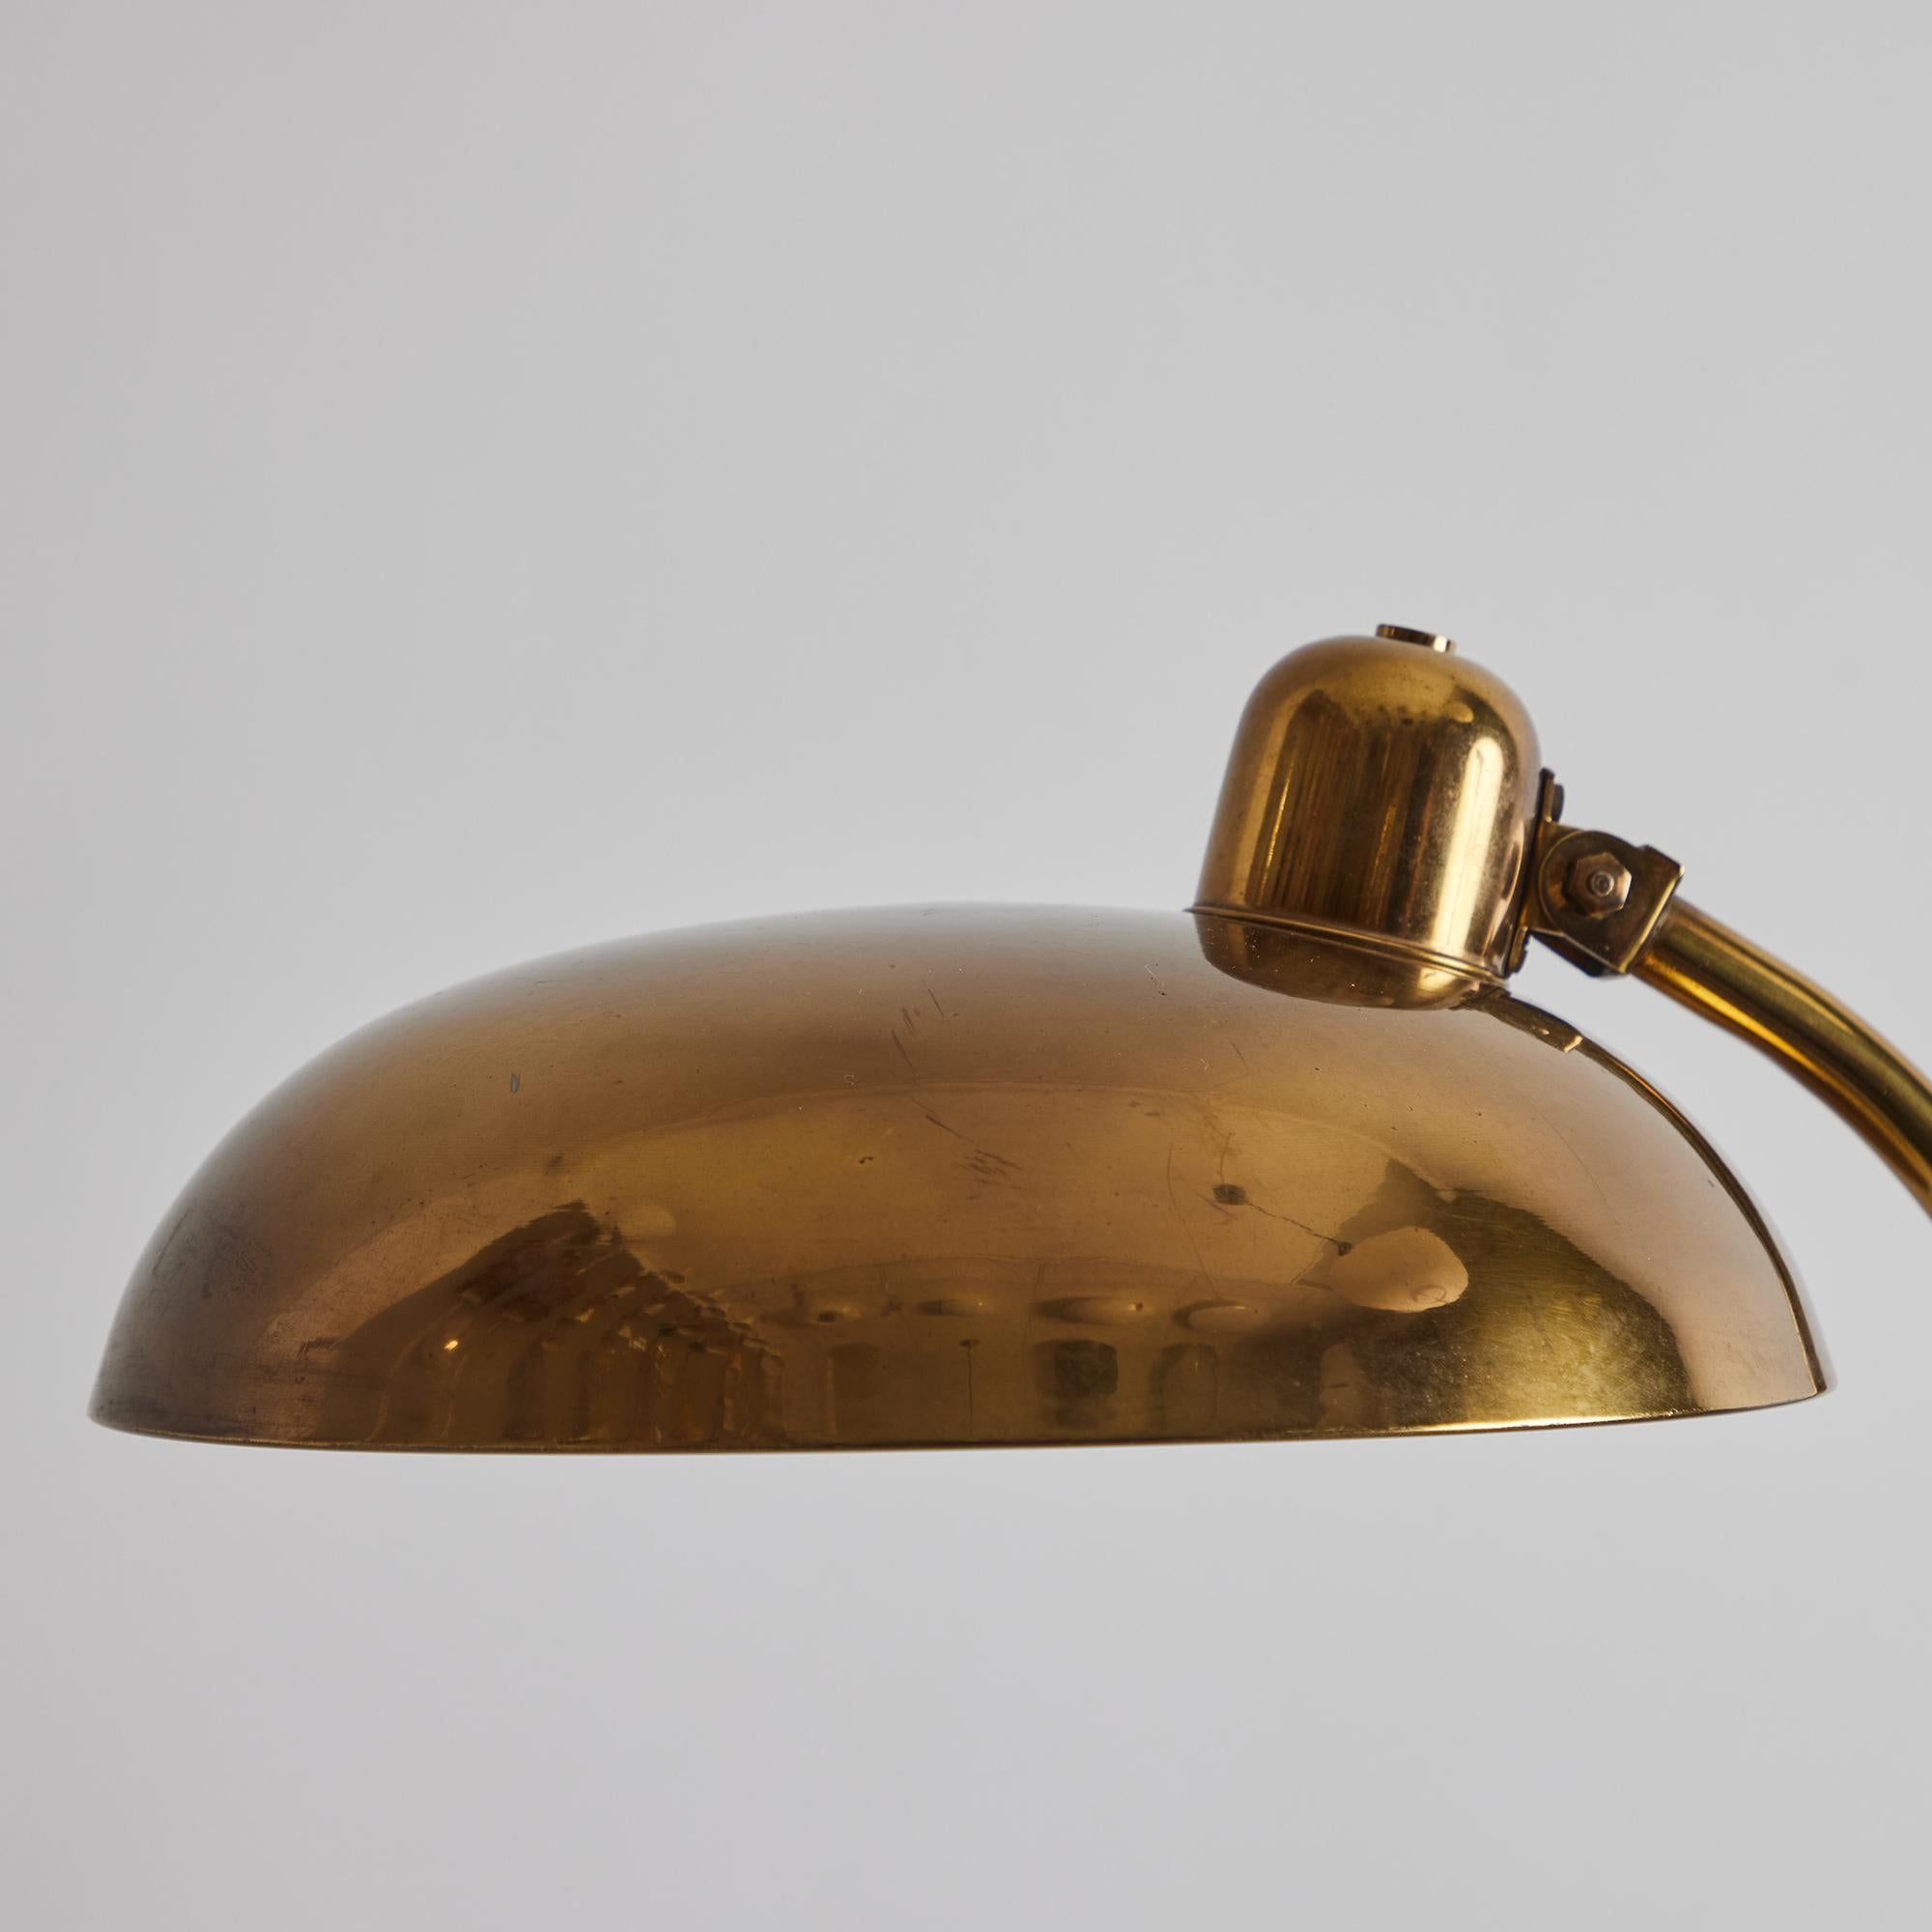 1940s Giovanni Michelucci Patinated Brass Ministerial Table Lamp for Lariolux For Sale 7